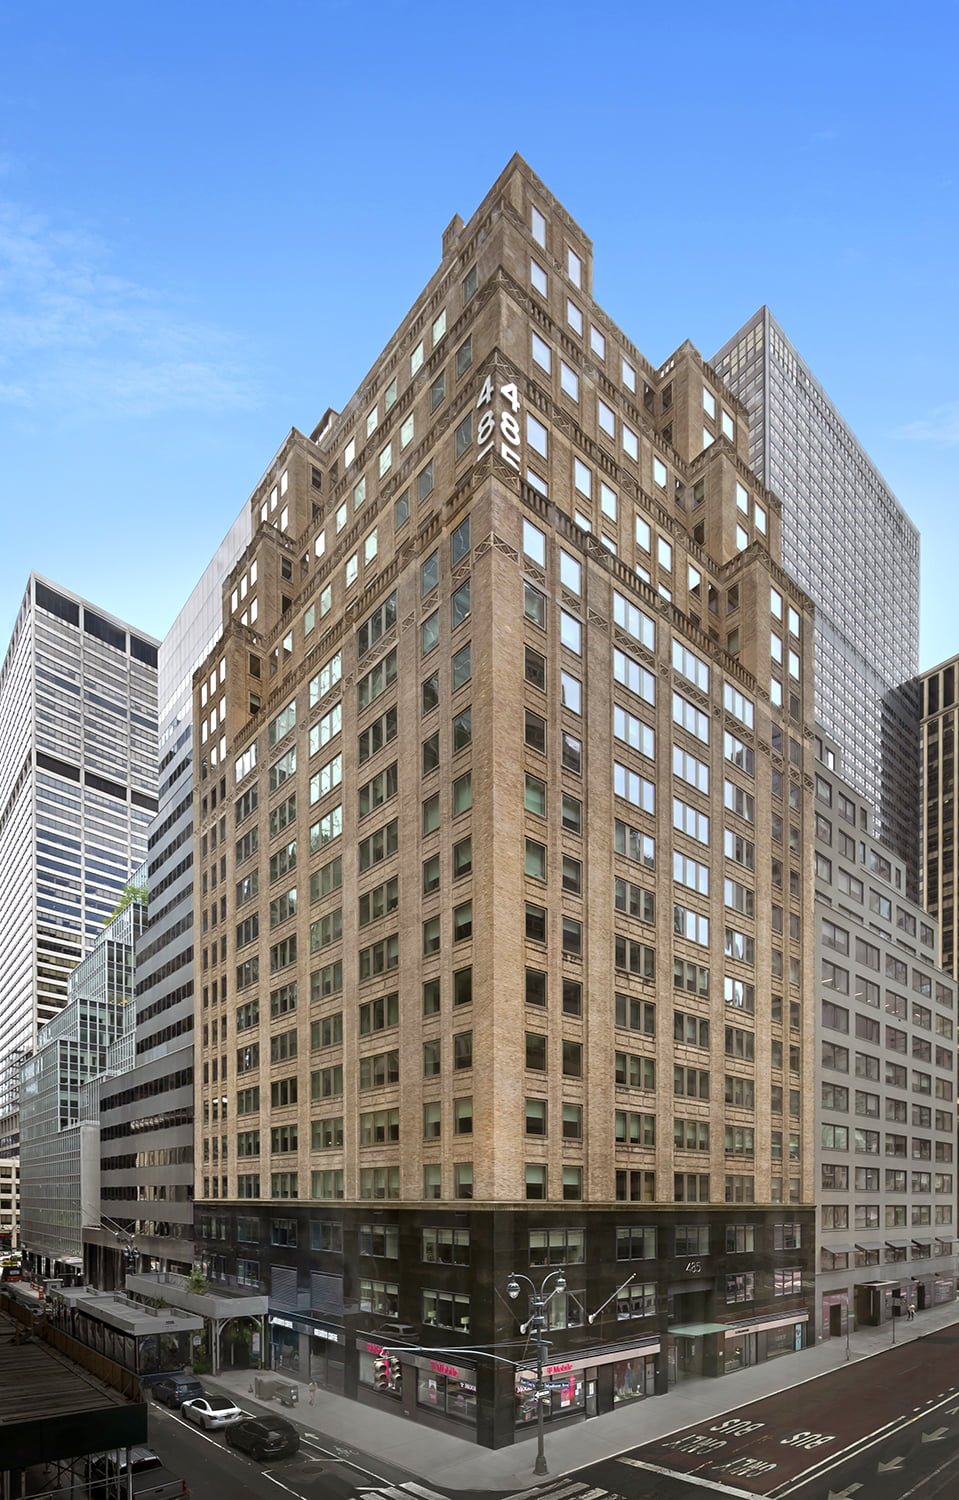 A view of the exterior of 485 Madison Avenue